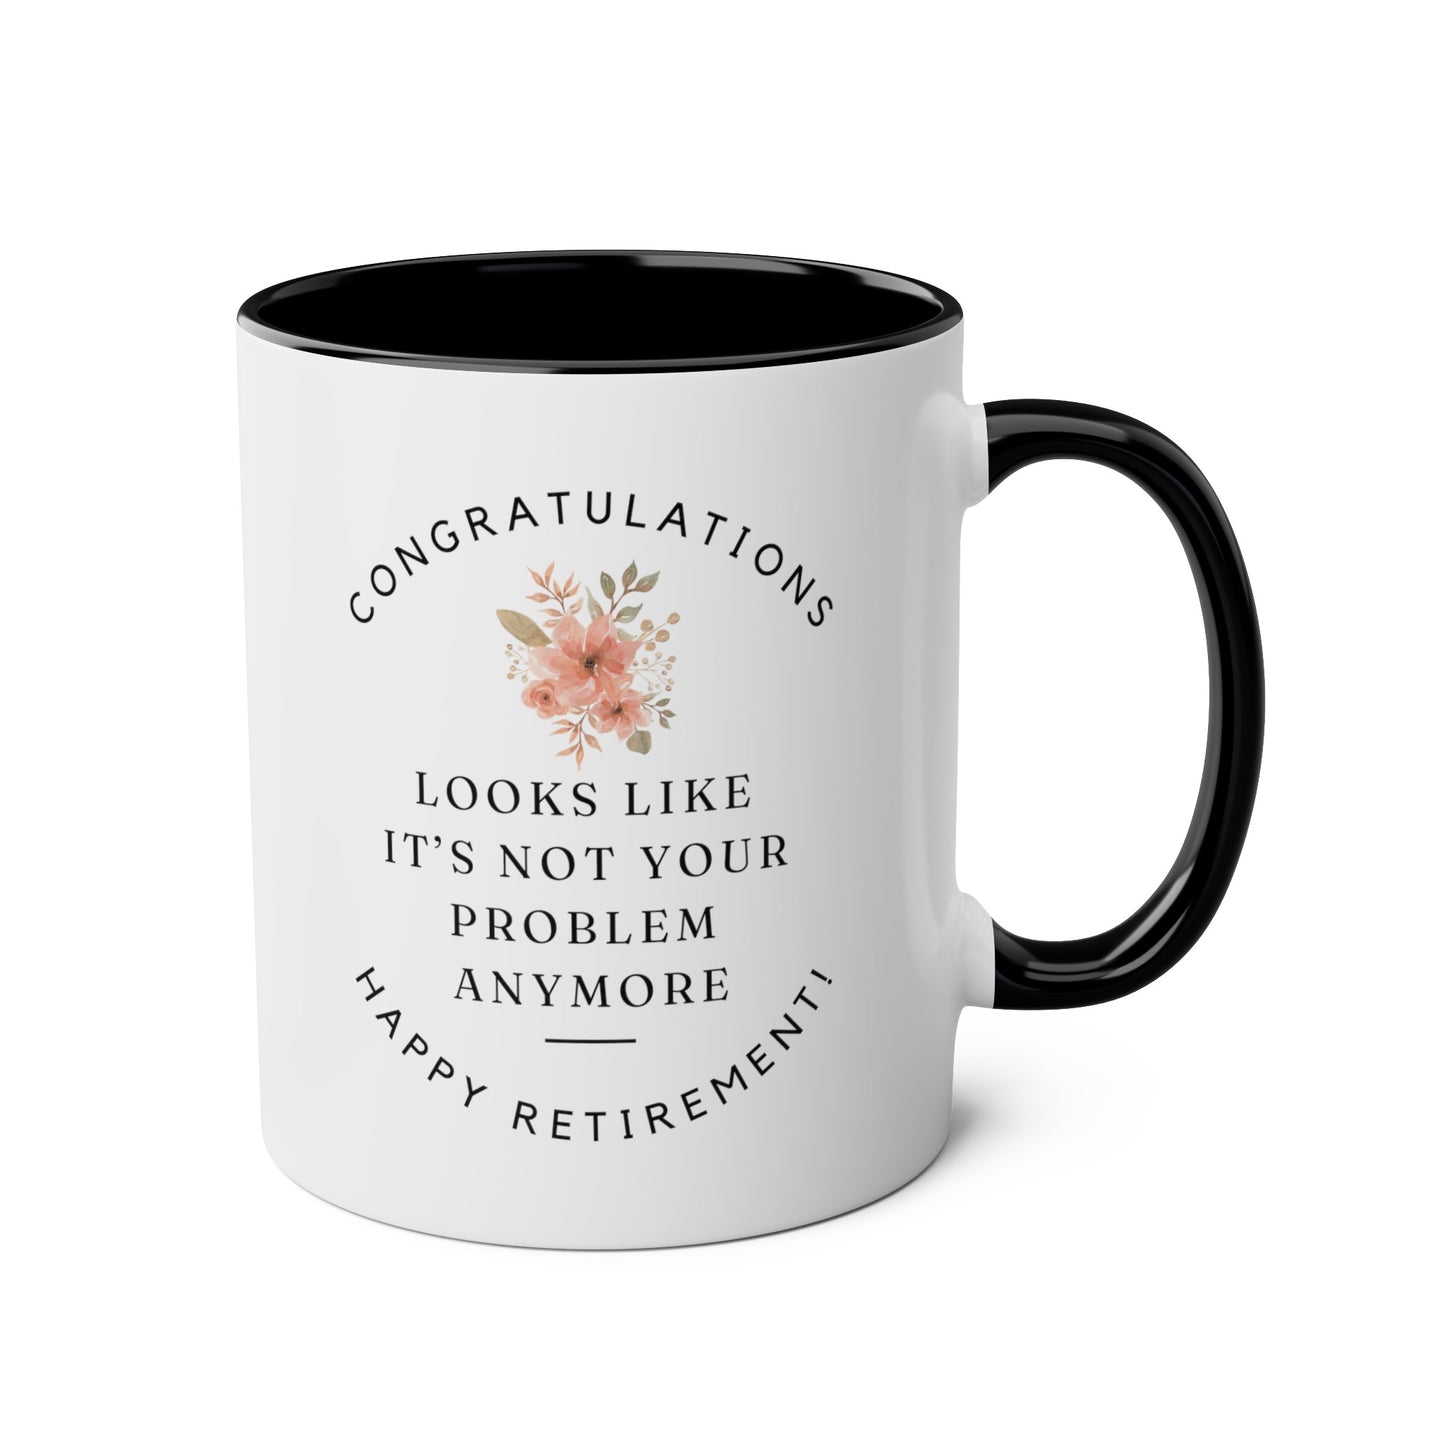 Congratulations Looks Like It's Not Your Problem Anymore Happy Retirement 11oz white with black accent funny coffee mug tea cup gift for retiree her teacher coworker waveywares wavey wares wavywares wavy wares